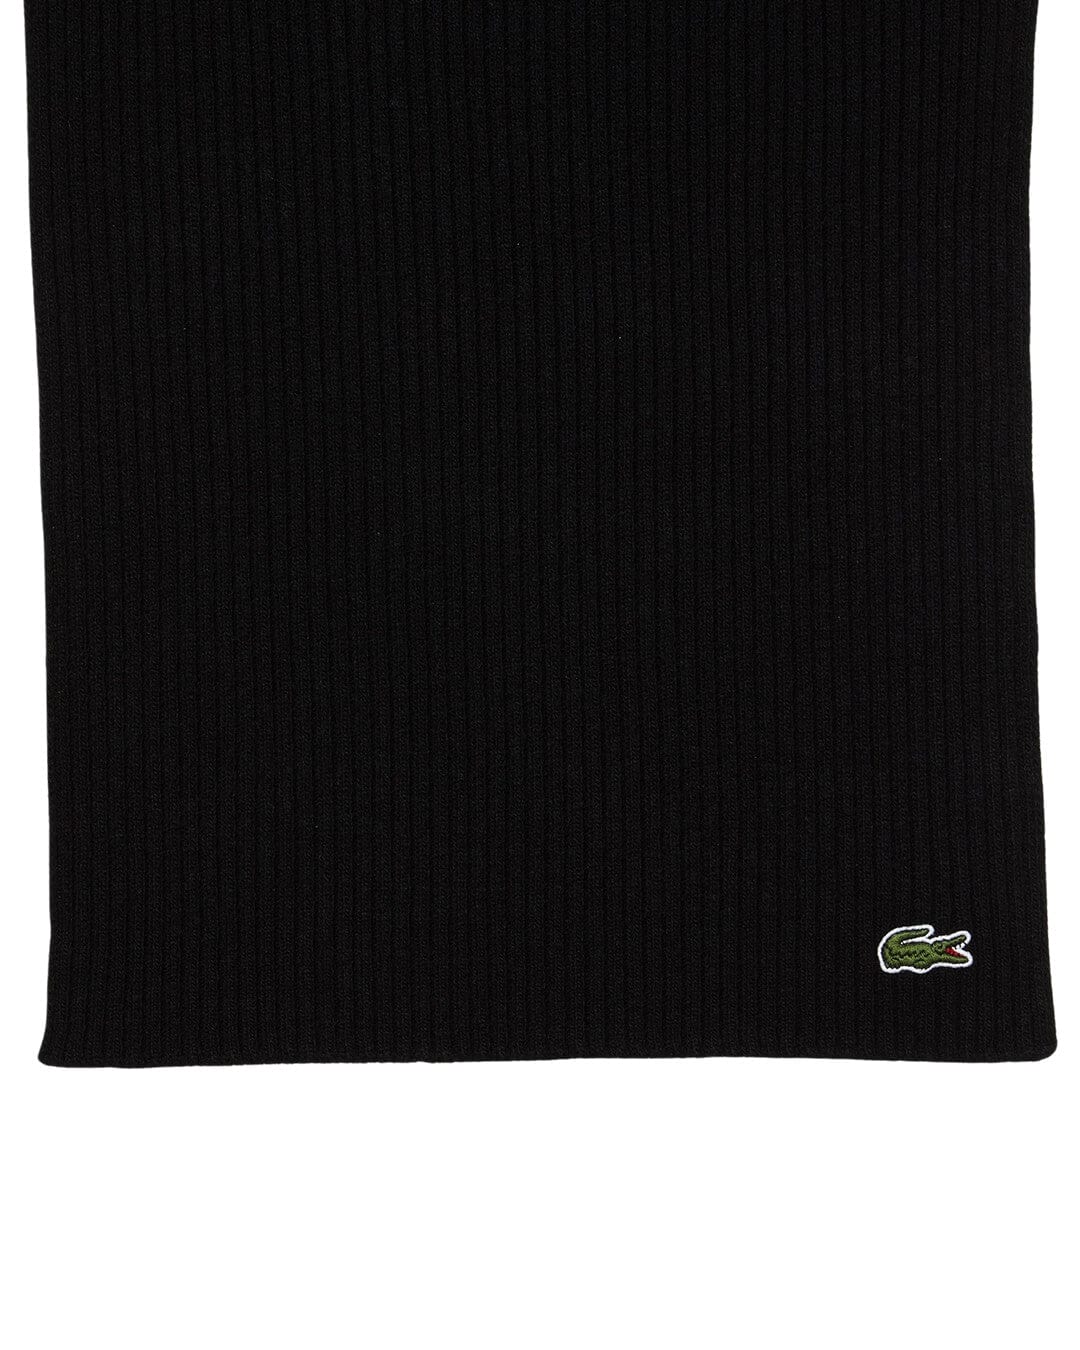 Lacoste Scarves ONE SIZE Lacoste Unisex Ribbed Wool Black Scarf